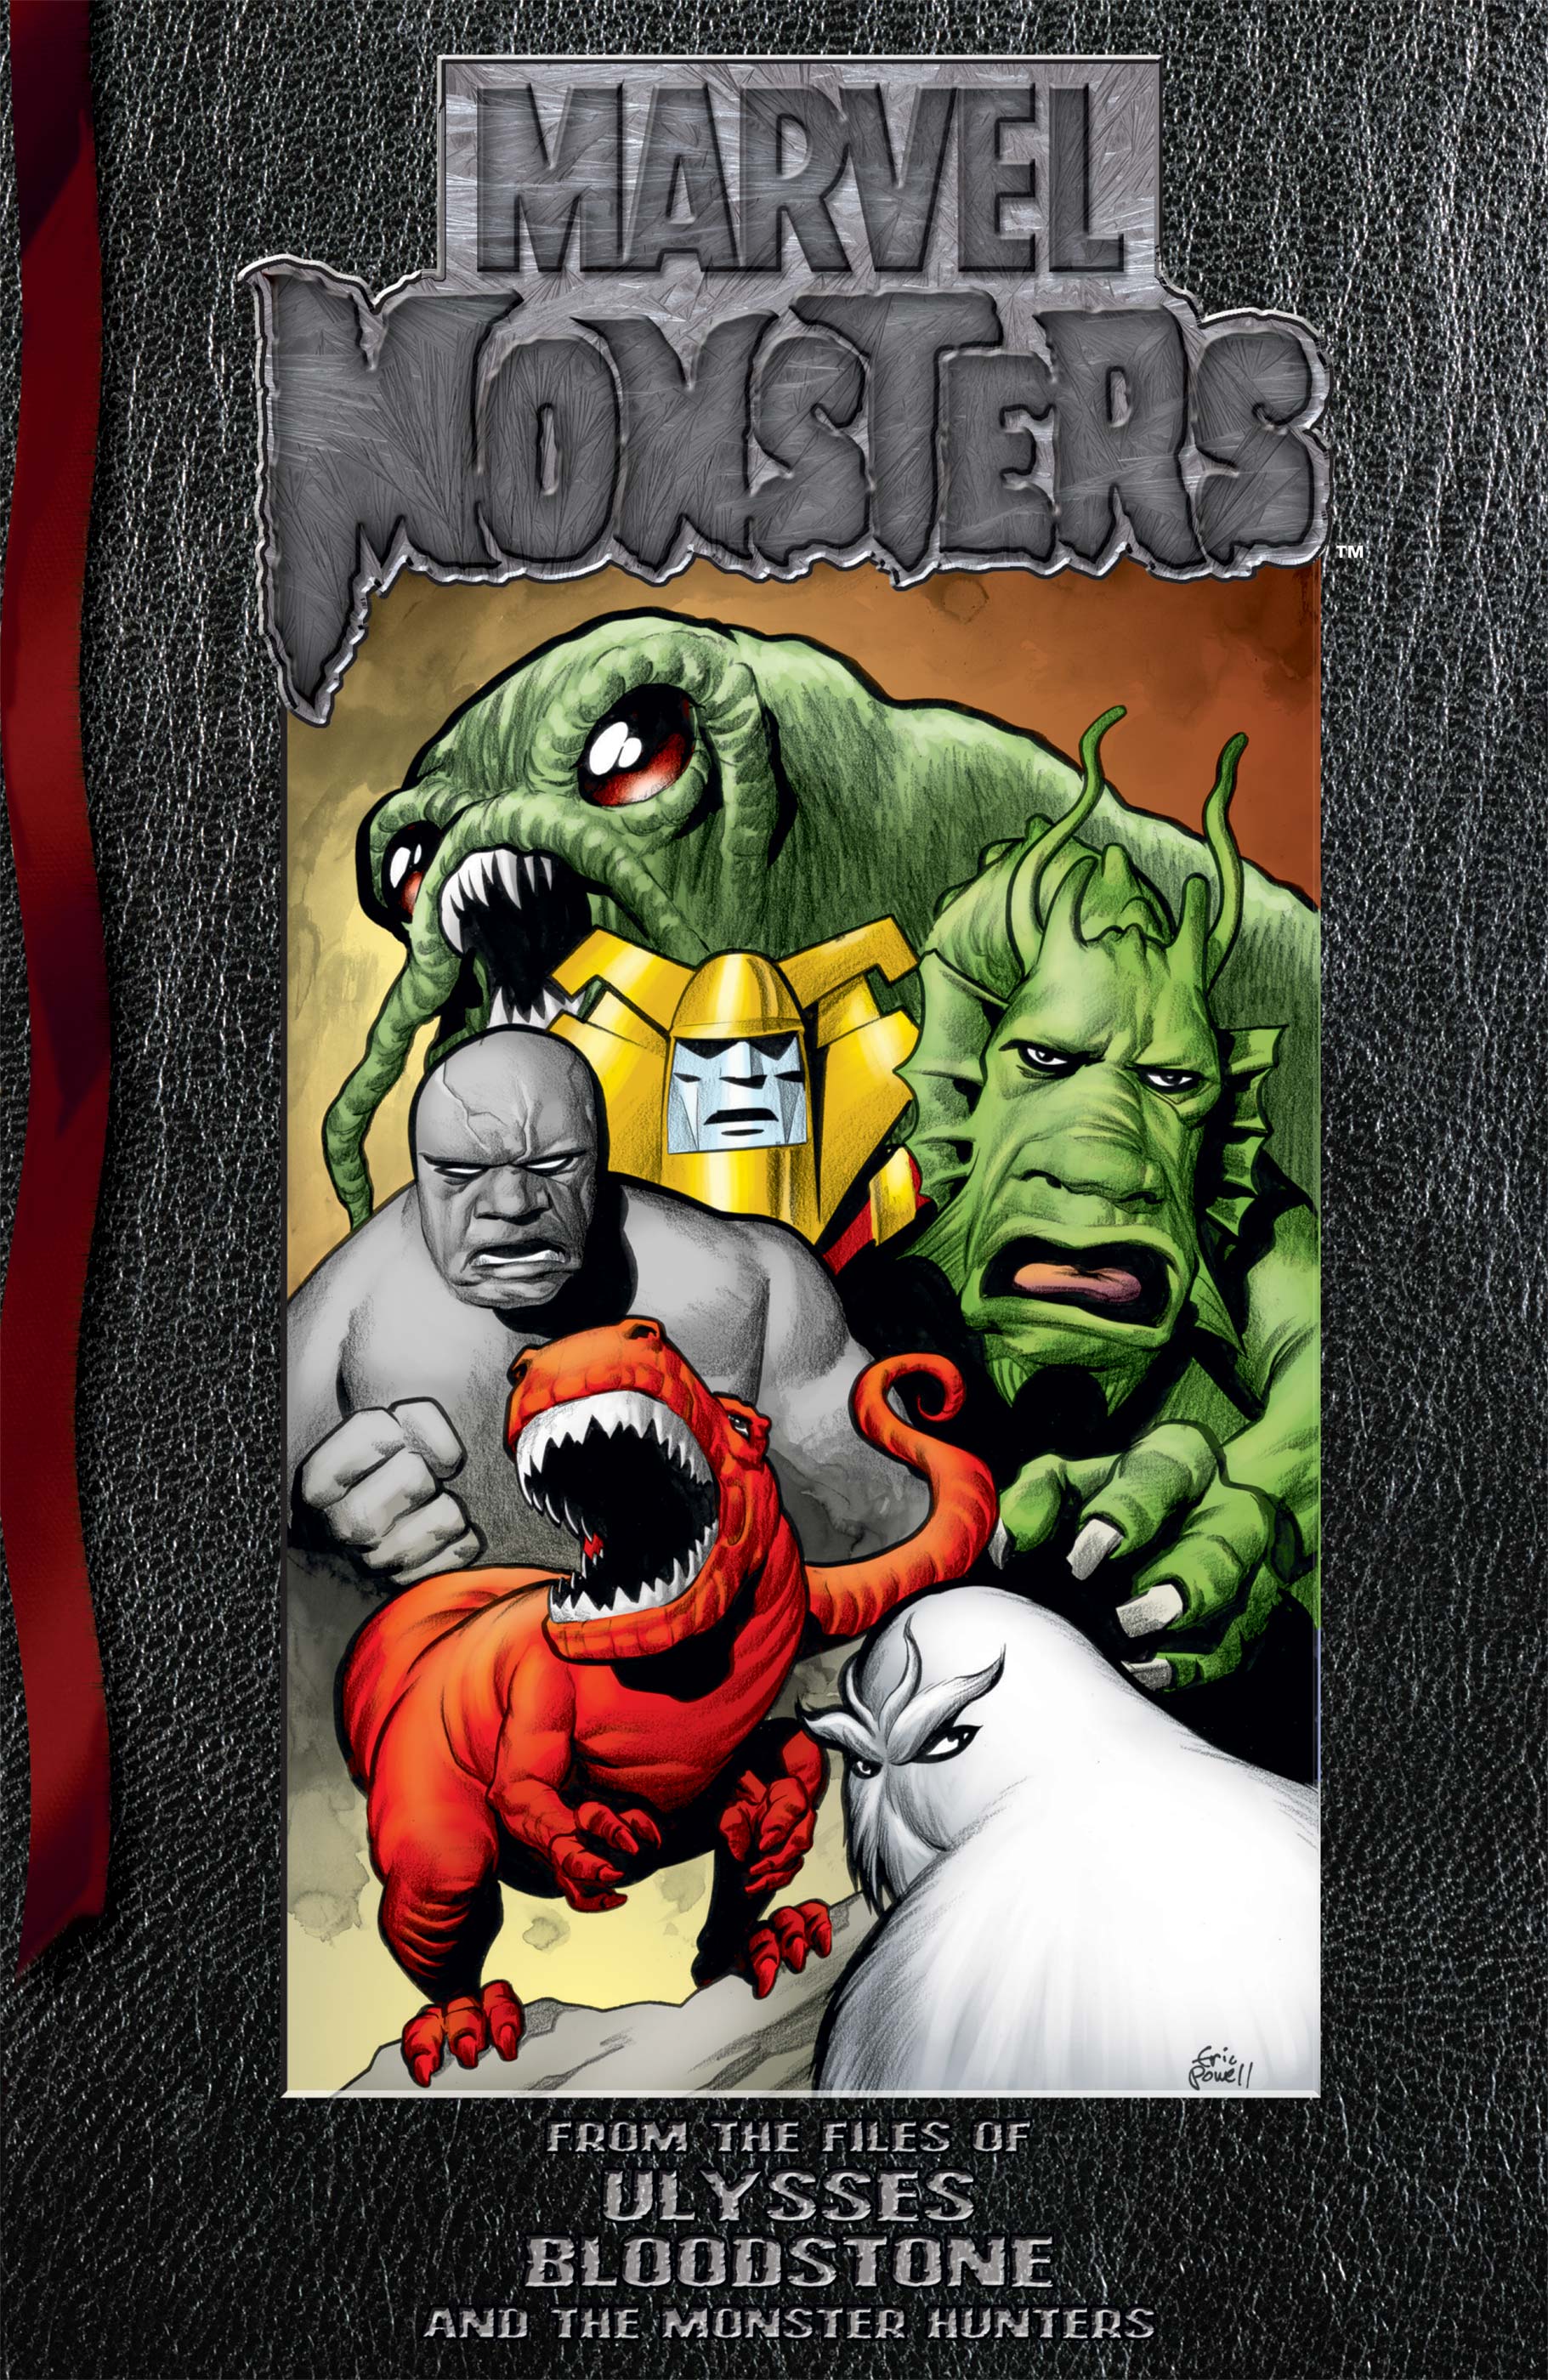 Marvel Monsters: From the Files of Ulysses Bloodstone & the Monster Hunters (2005)